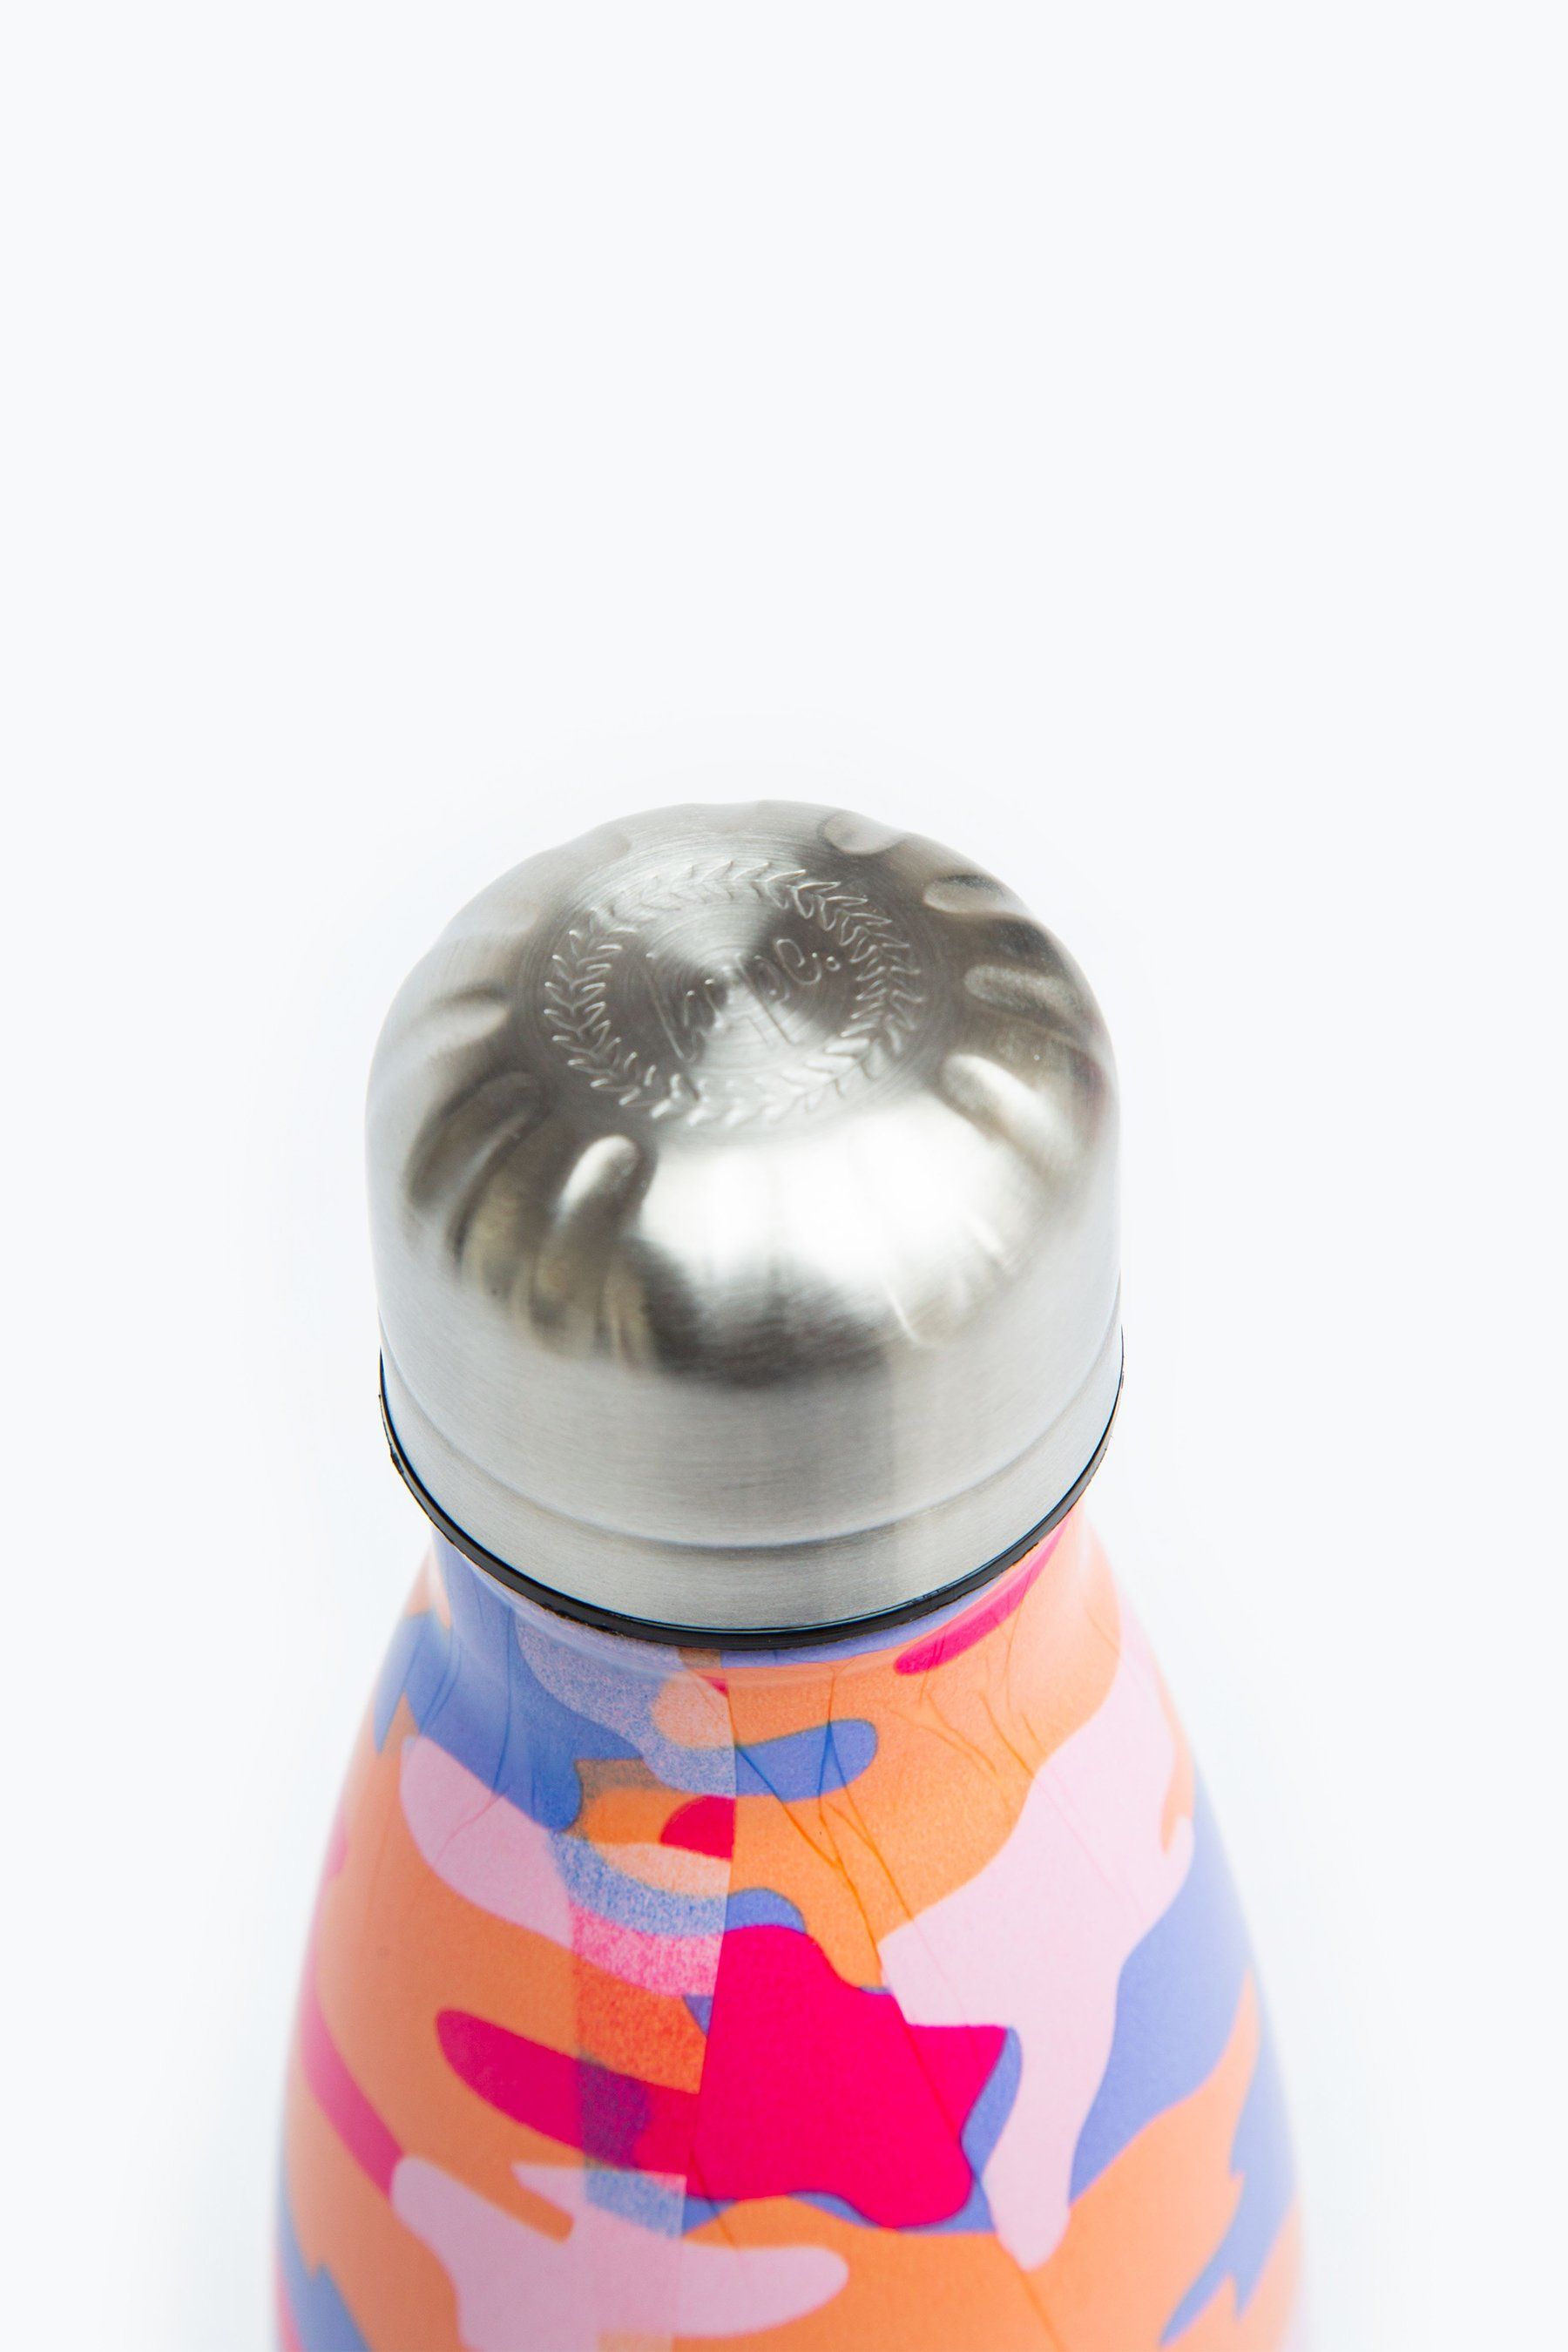 Keeping you hydrated, in style. Meet the HYPE. peach camo metal reusable bottle, perfect for when you're on the go. Designed in Aluminium to ensure your water stays ice-cold and for chillier days, keeping your oat milk latte warm for longer. Why not grab one of our lunch bags or backpacks with a bottle holder to complete the look, we suggest grabbing the matching set.